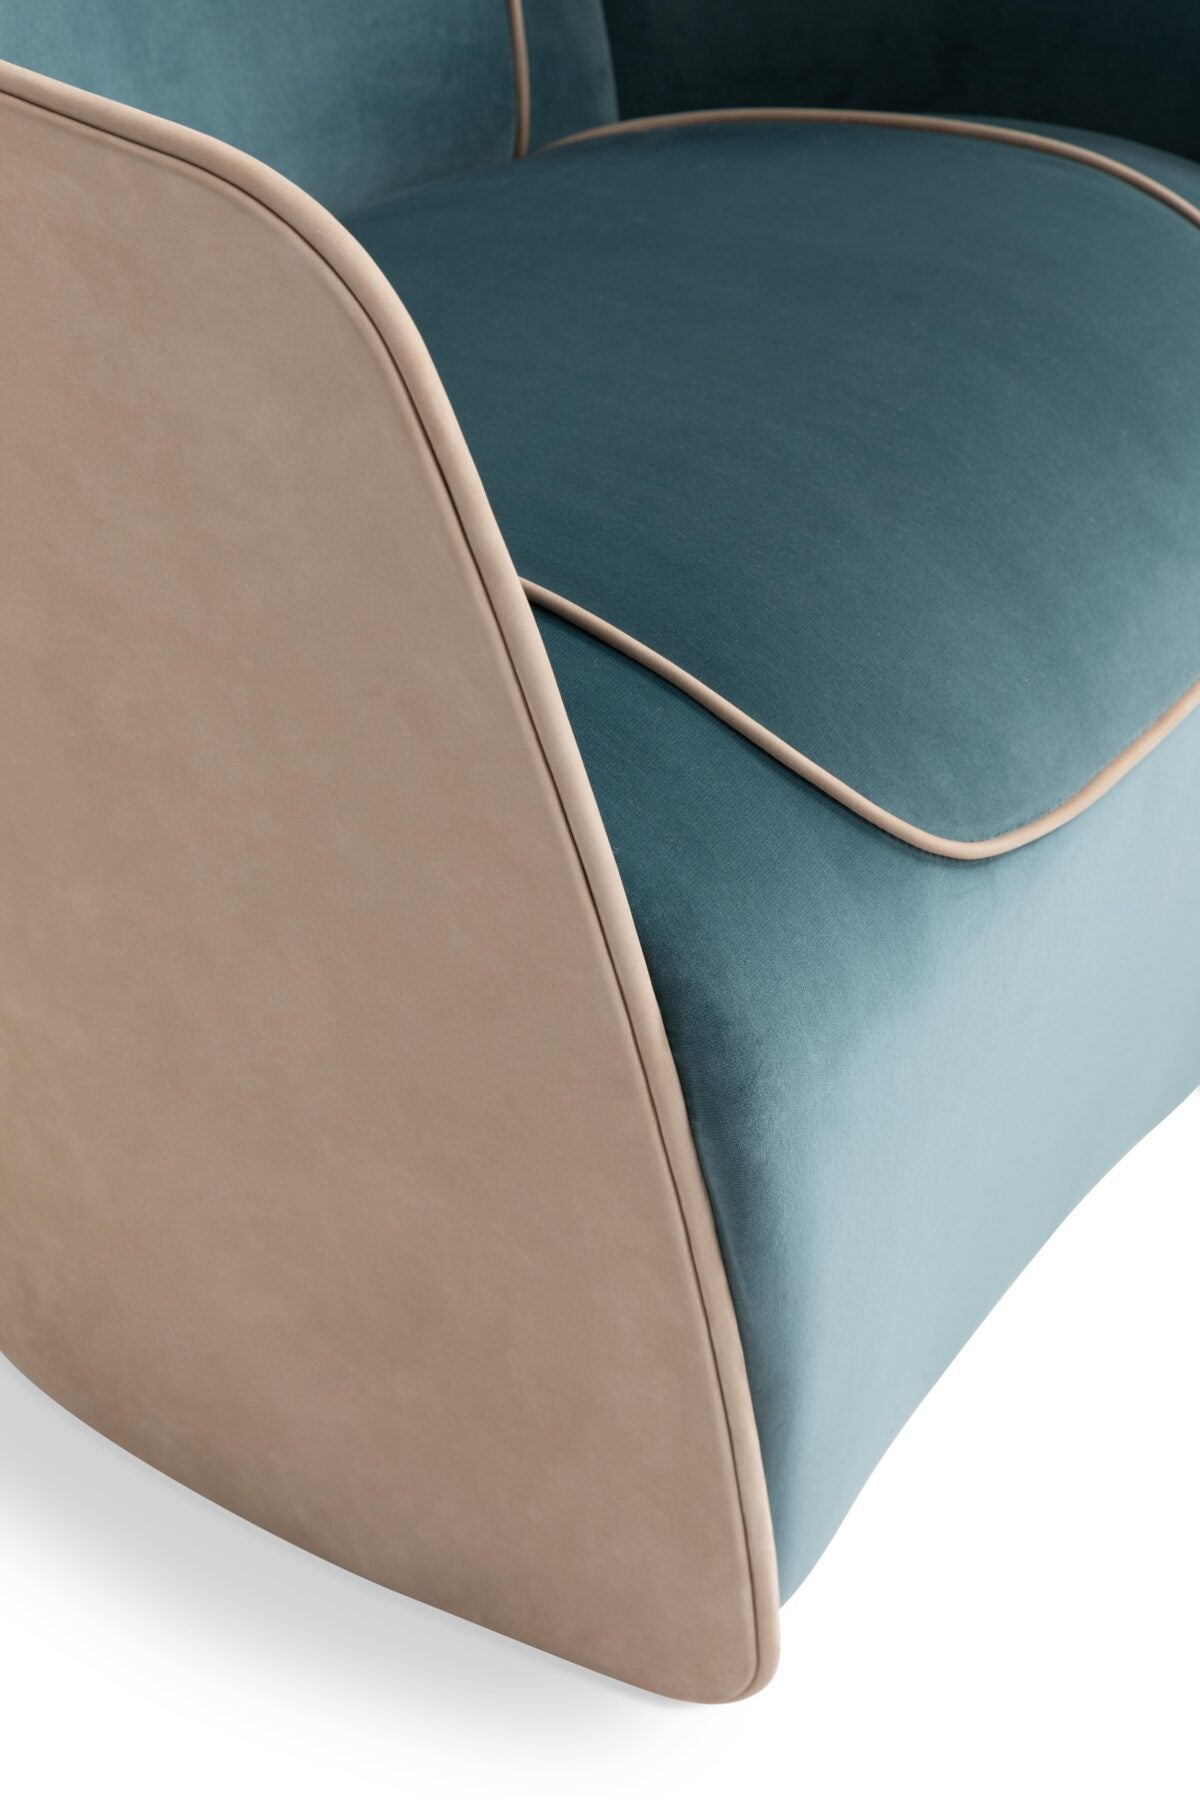 bentley-home-rugby-armchair-back-detail